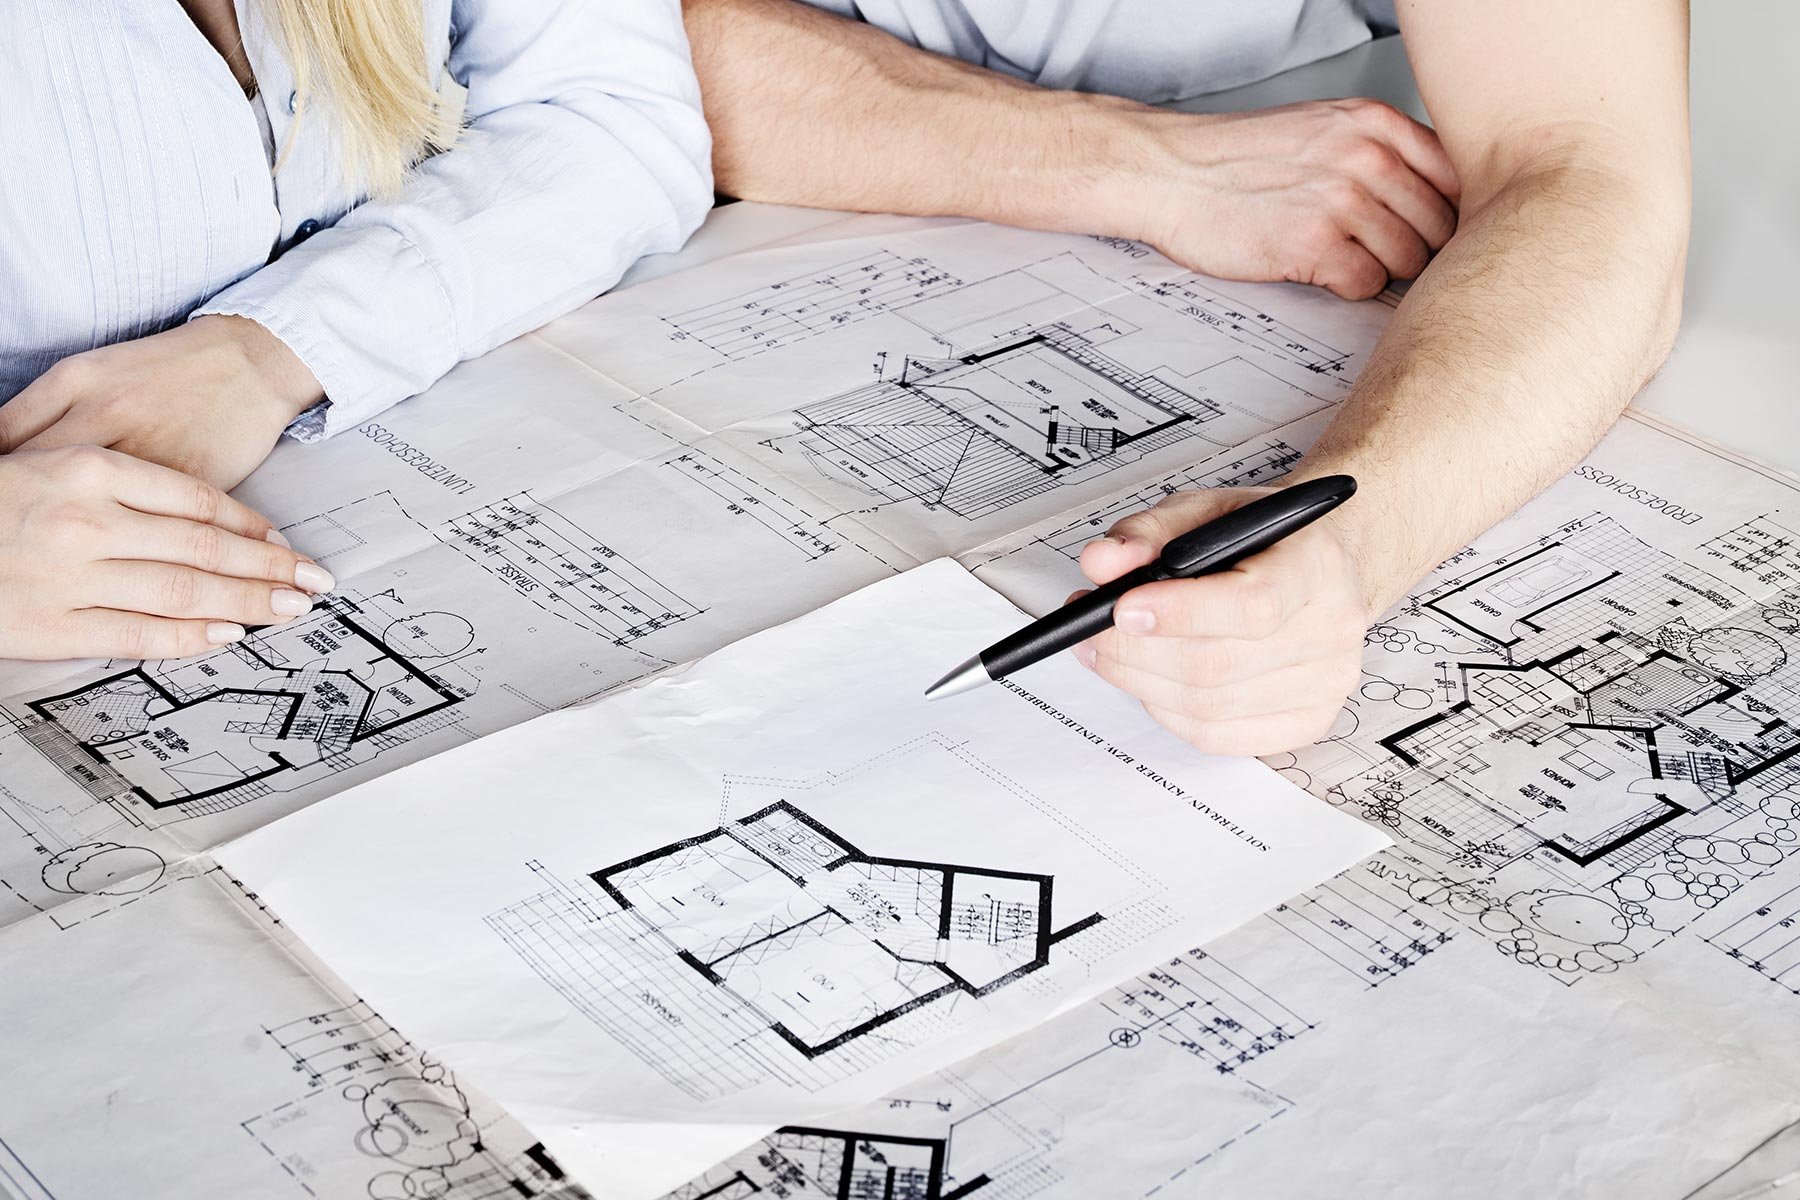 Man and woman looking at blueprints for restaurant kitchen